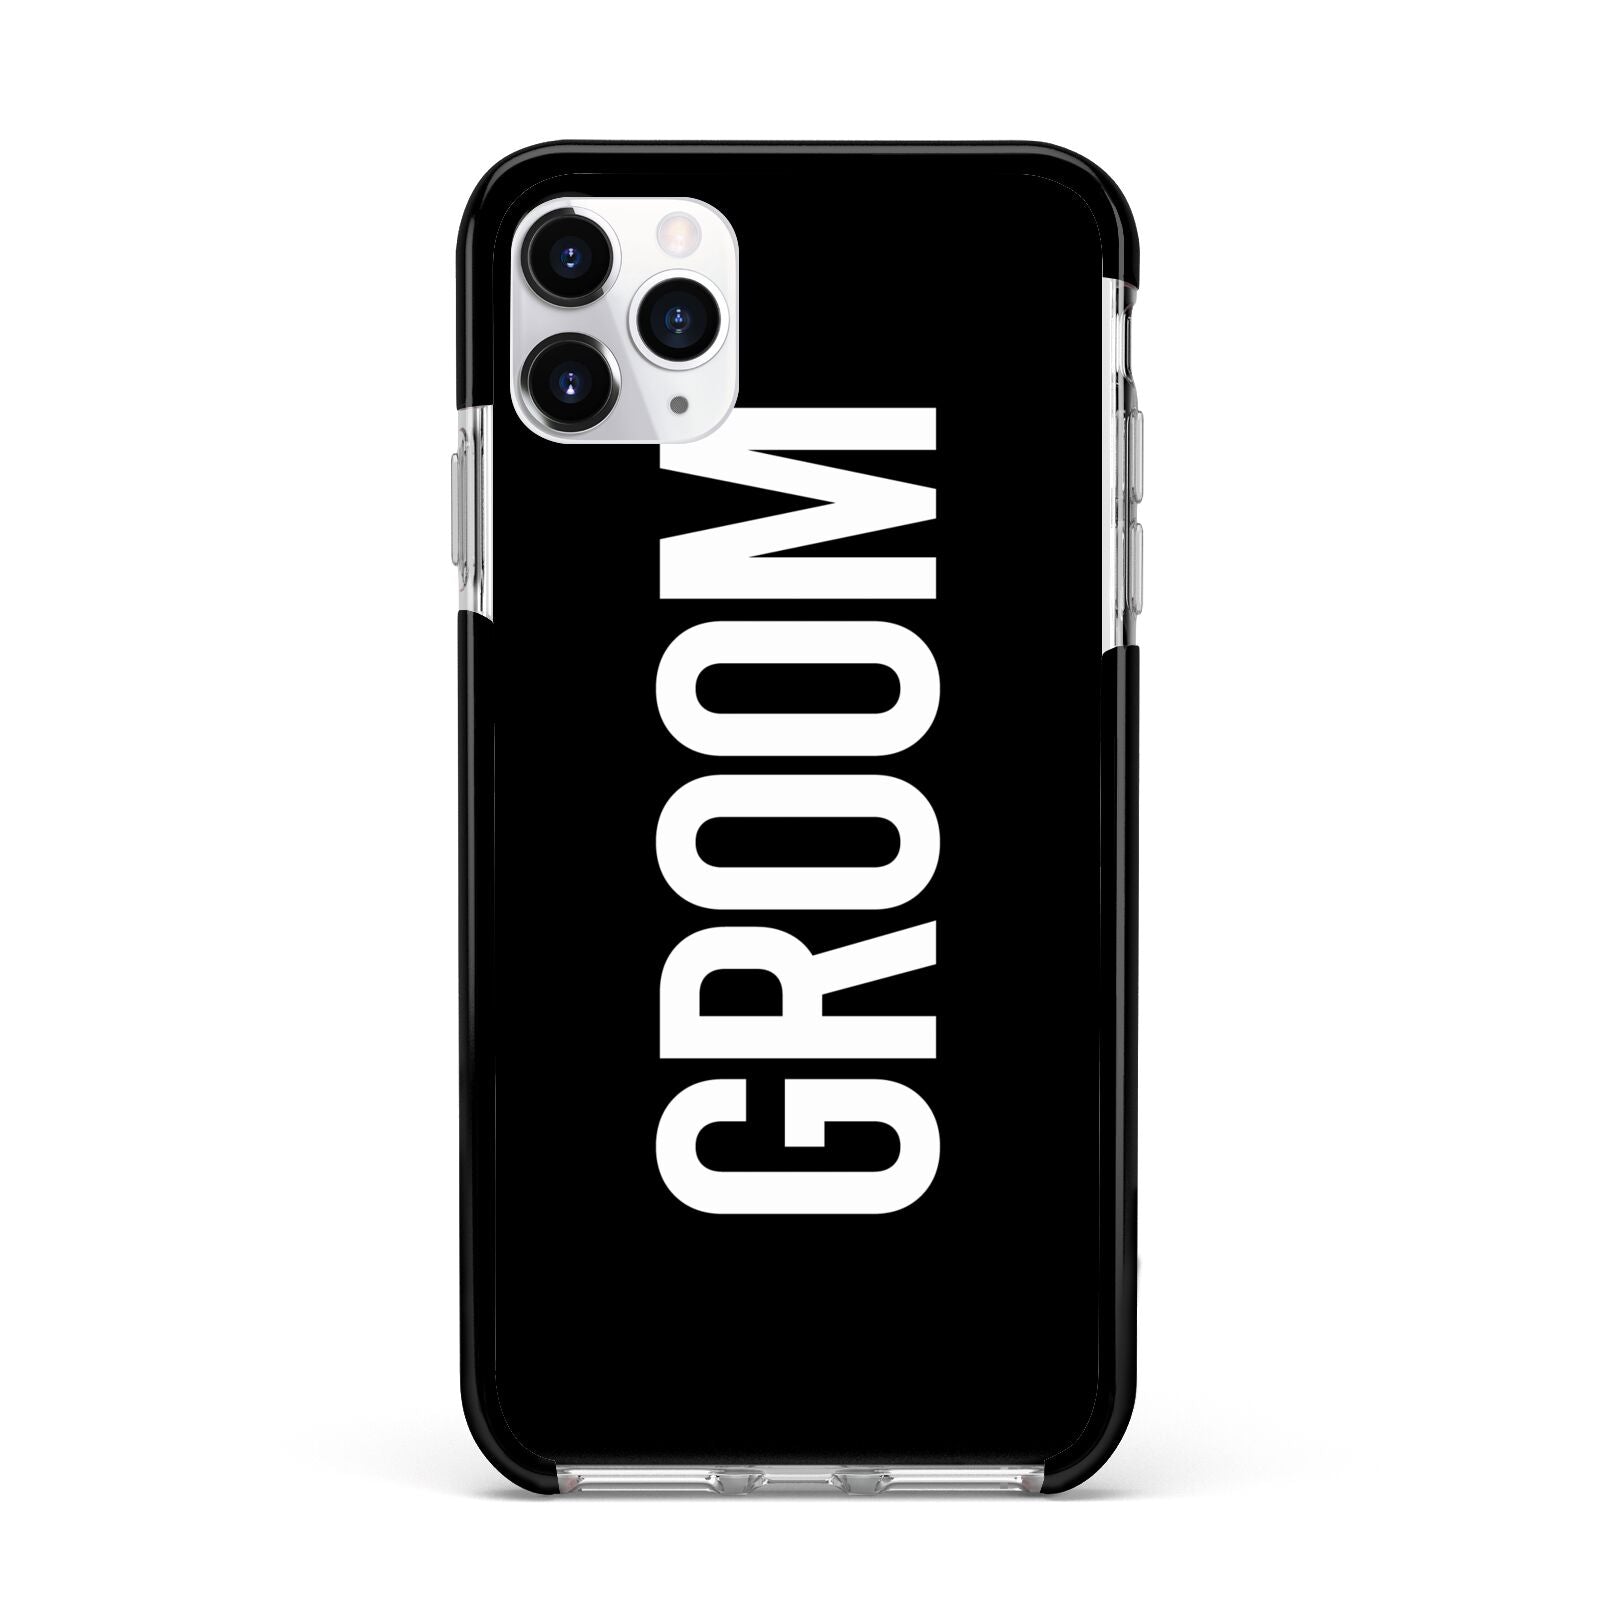 Groom Apple iPhone 11 Pro Max in Silver with Black Impact Case